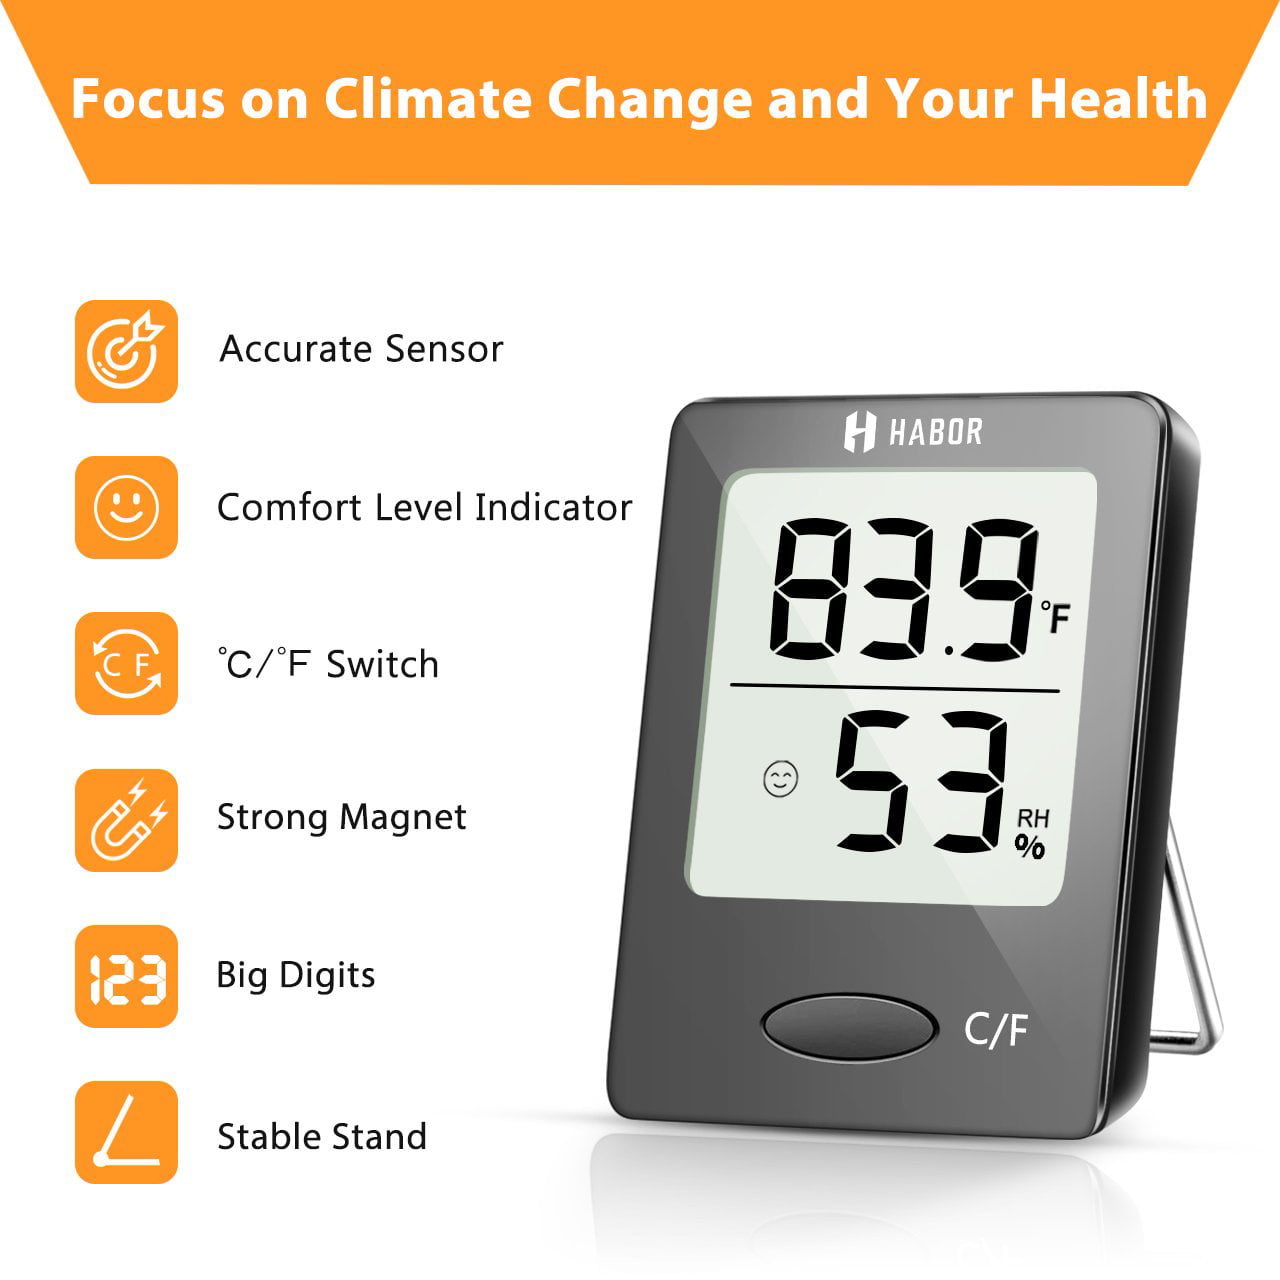 Mini High Accuracy Digital Indoor Hygrometer Thermometer Temperature  Monitor And Humidity Meter, Thermo Hygrometer Comfort Level Indicator  Betterlife